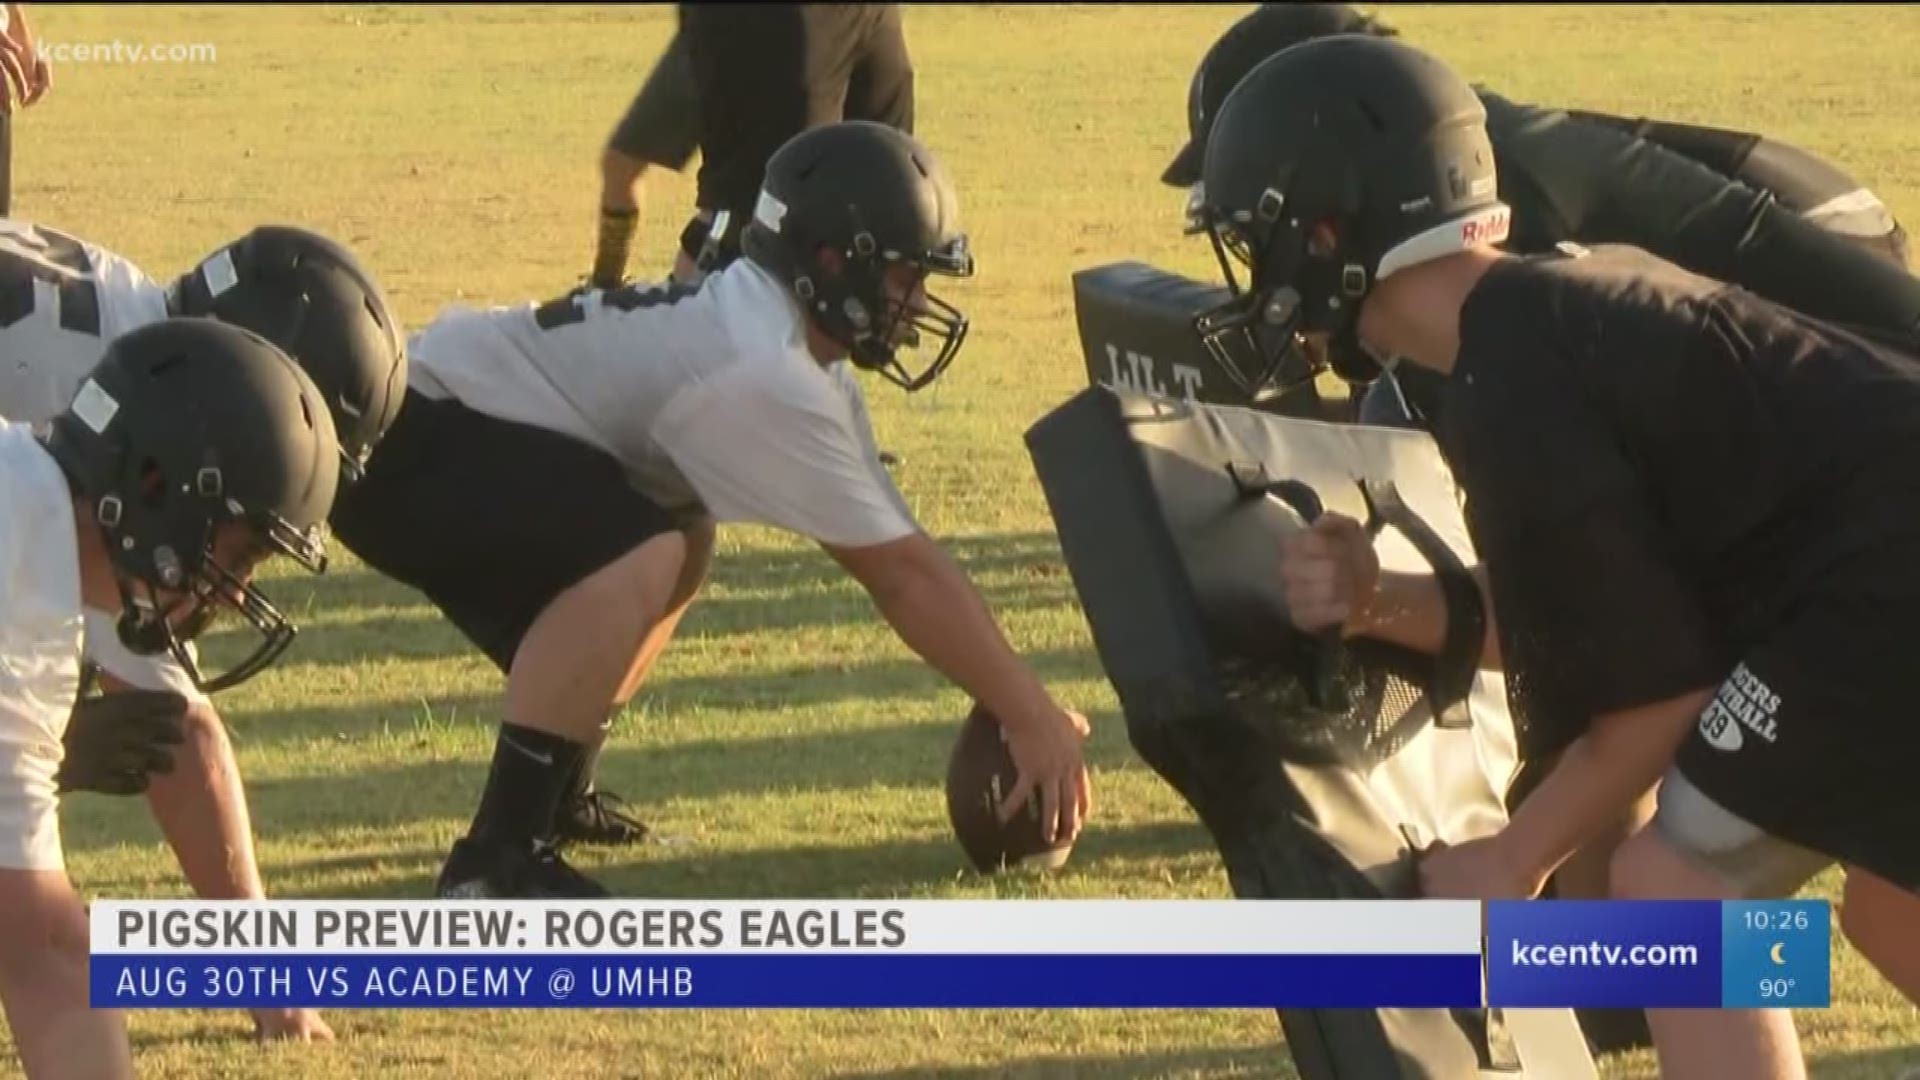 Pigskin Preview: Rogers Eagles